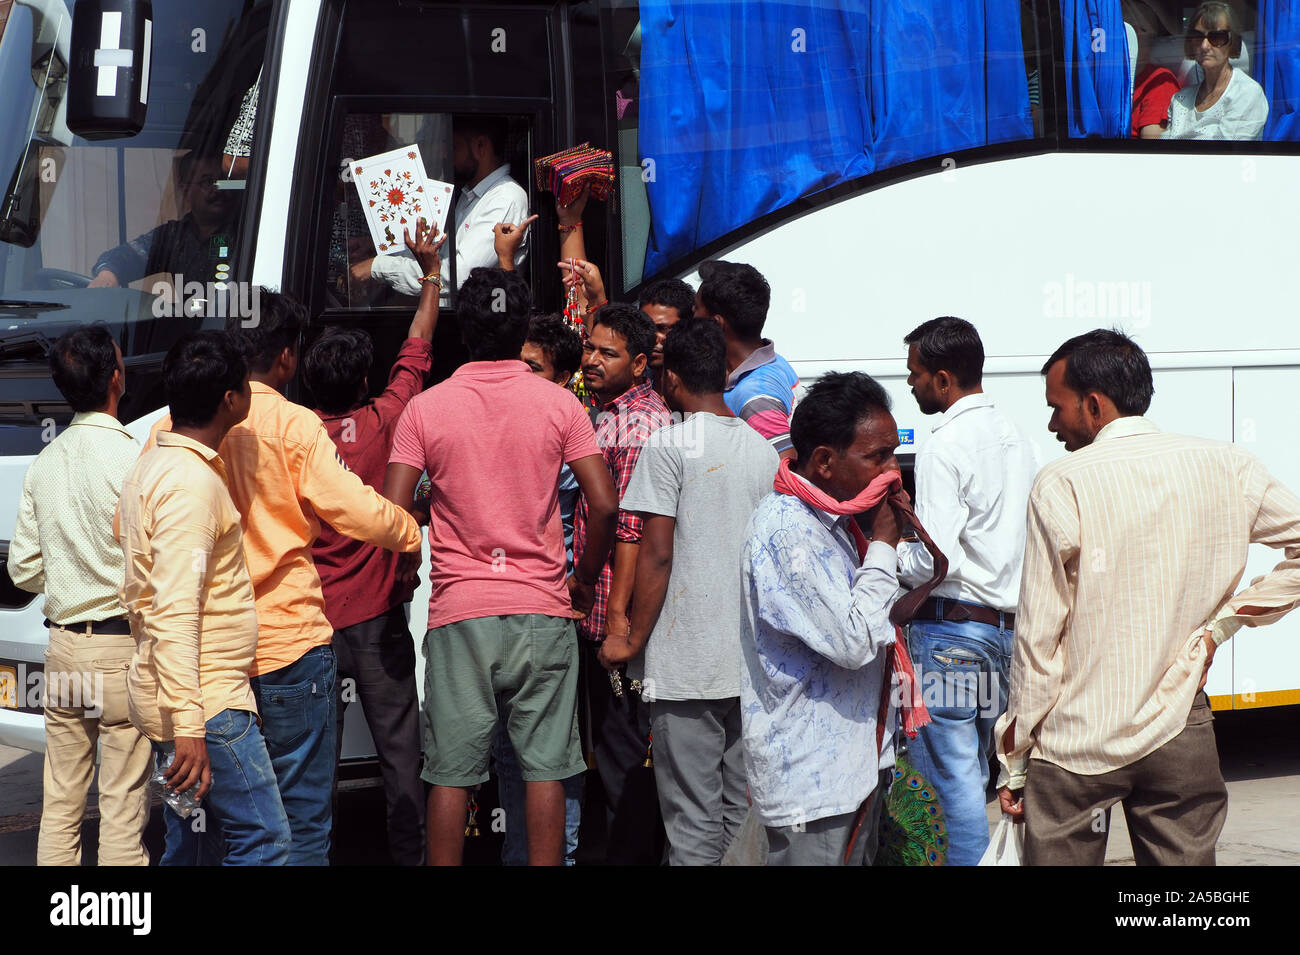 A tourist coach is besieged with souvenir sellers near to the Taj Mahal in Agra, India. Stock Photo